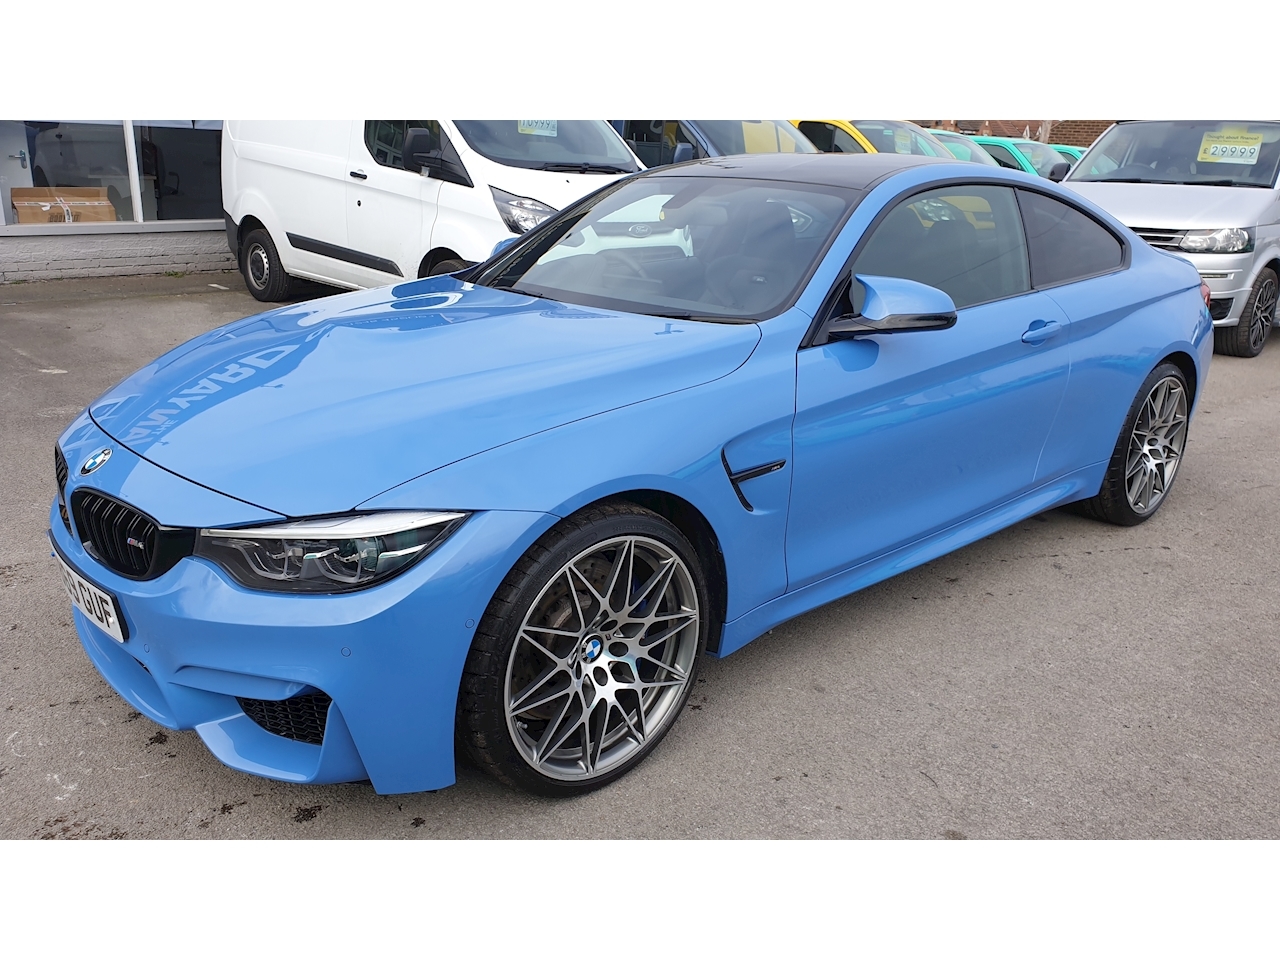 3.0 BiTurbo GPF Competition Coupe 2dr Petrol DCT (s/s) (450 ps)